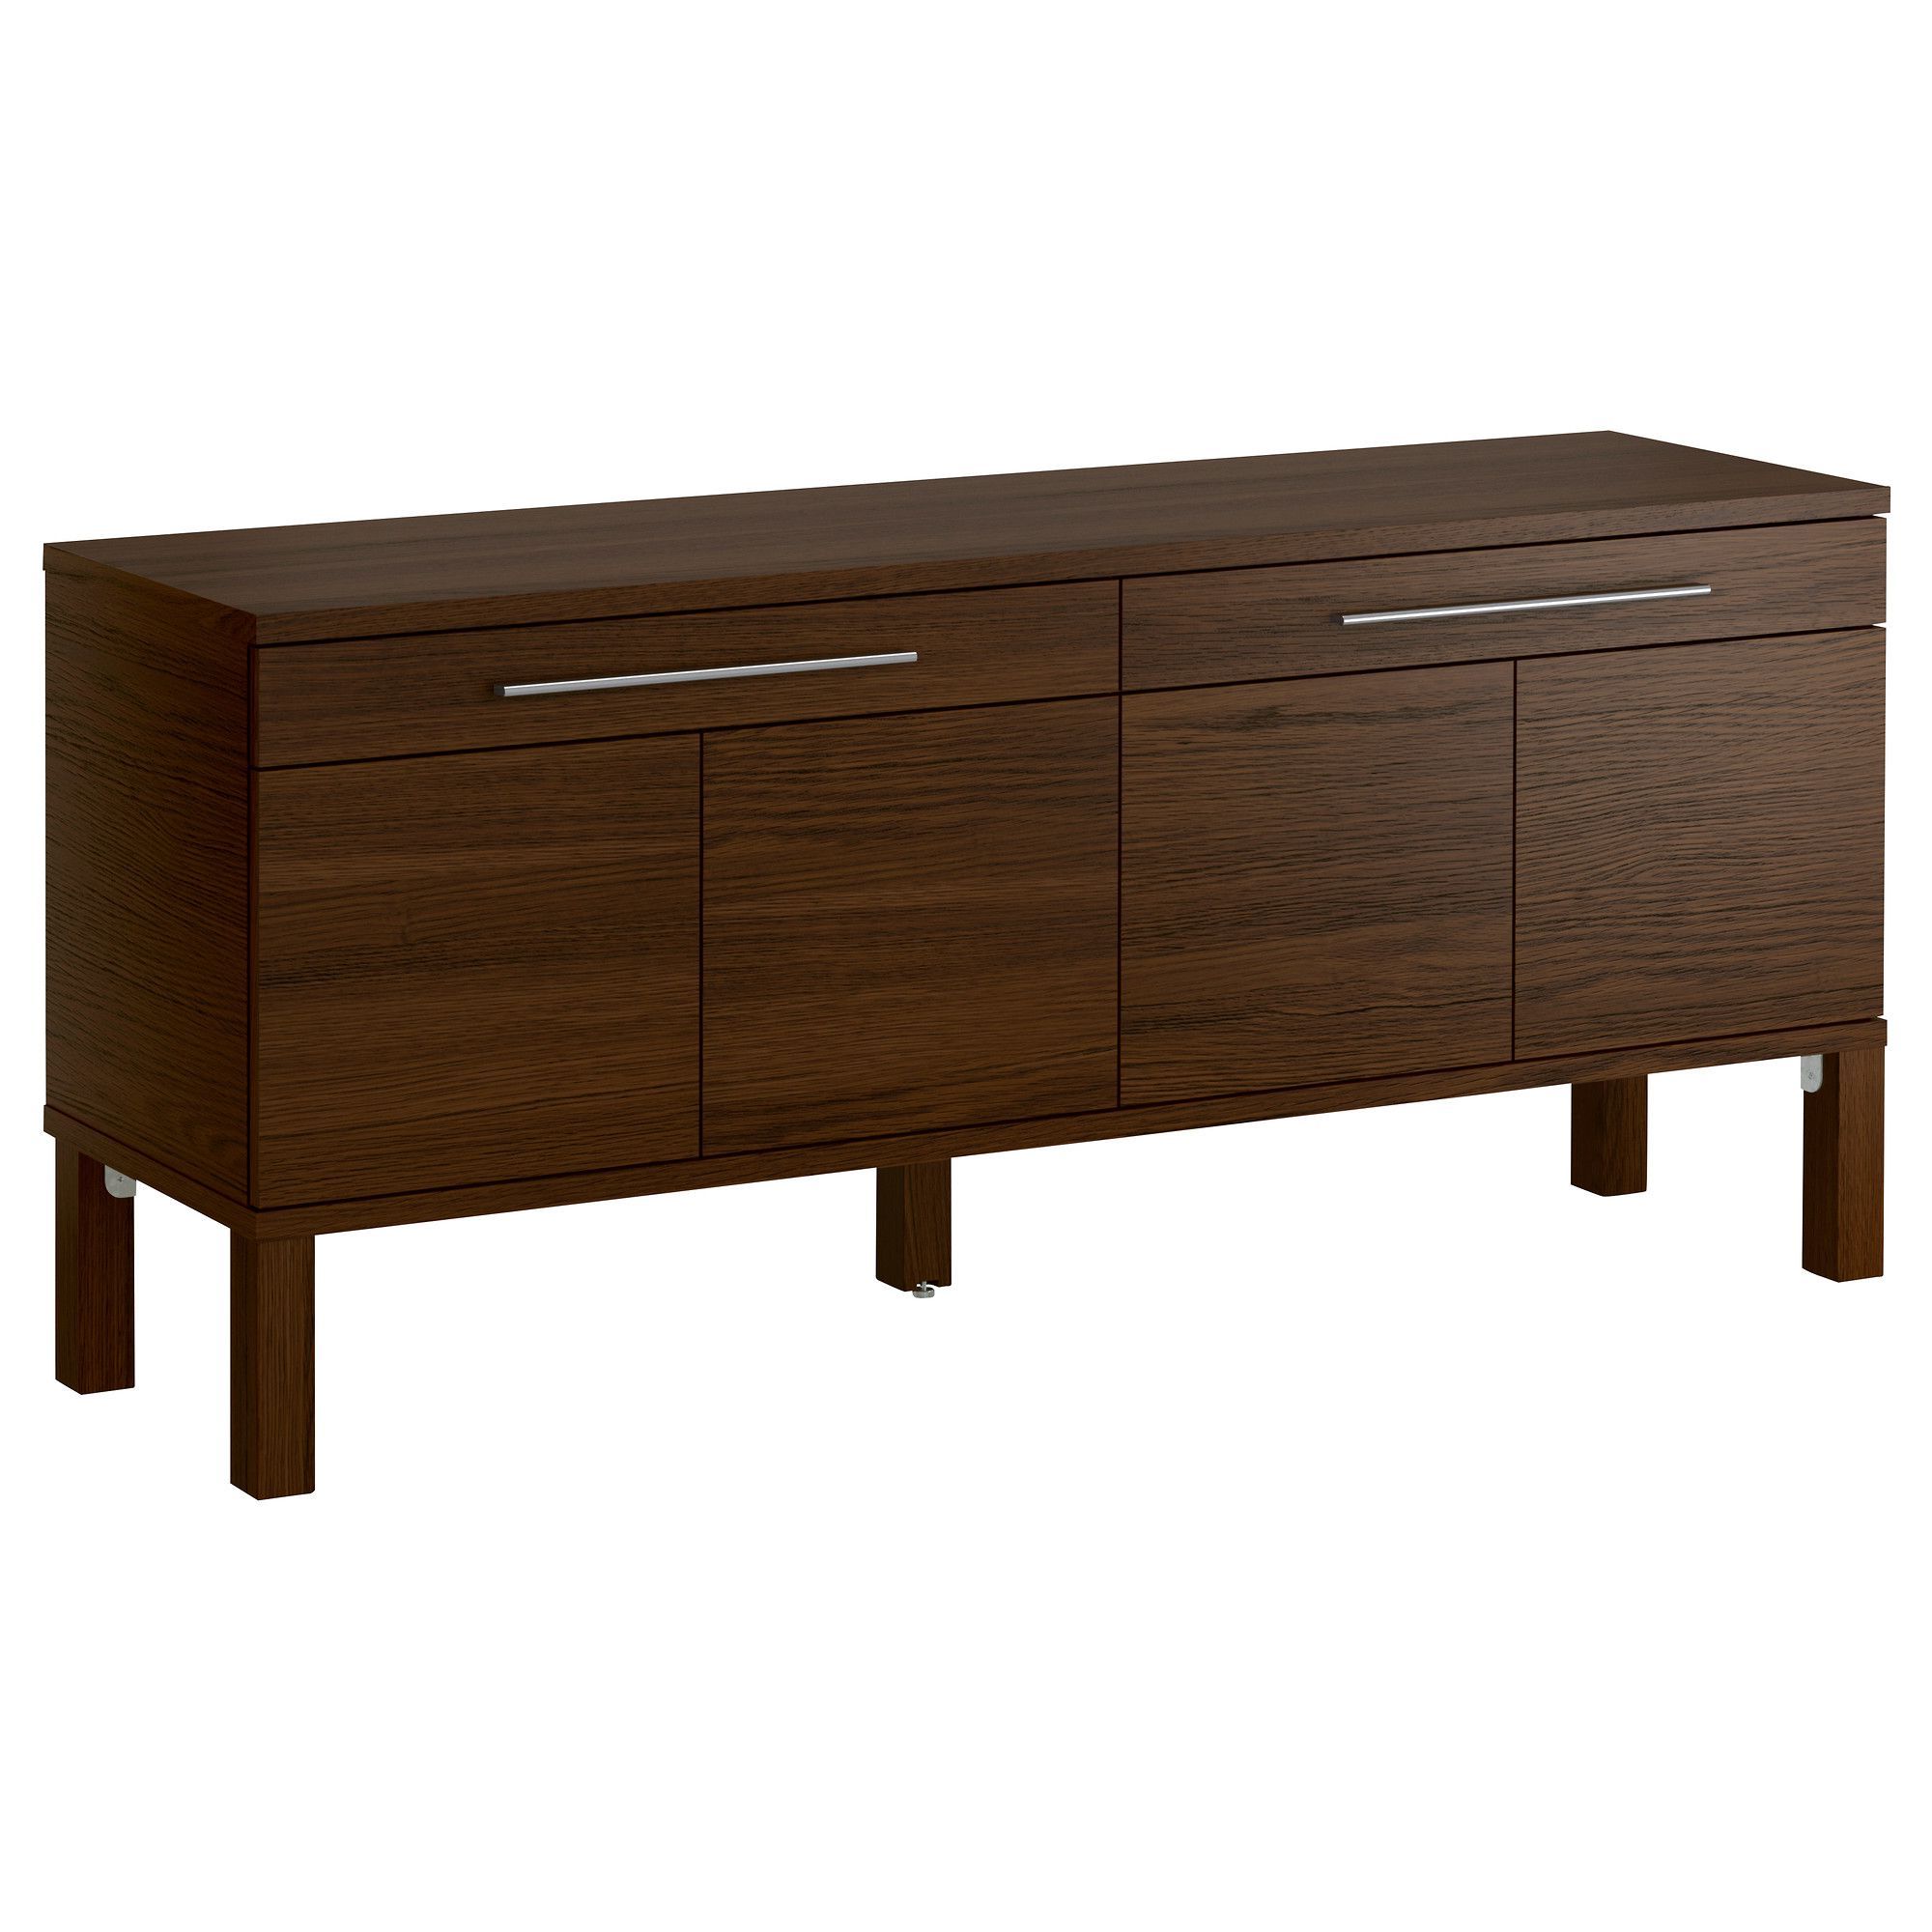 Us – Furniture And Home Furnishings | Dining Room With Contemporary Wooden Buffets With One Side Door Storage Cabinets And Two Drawers (View 1 of 20)